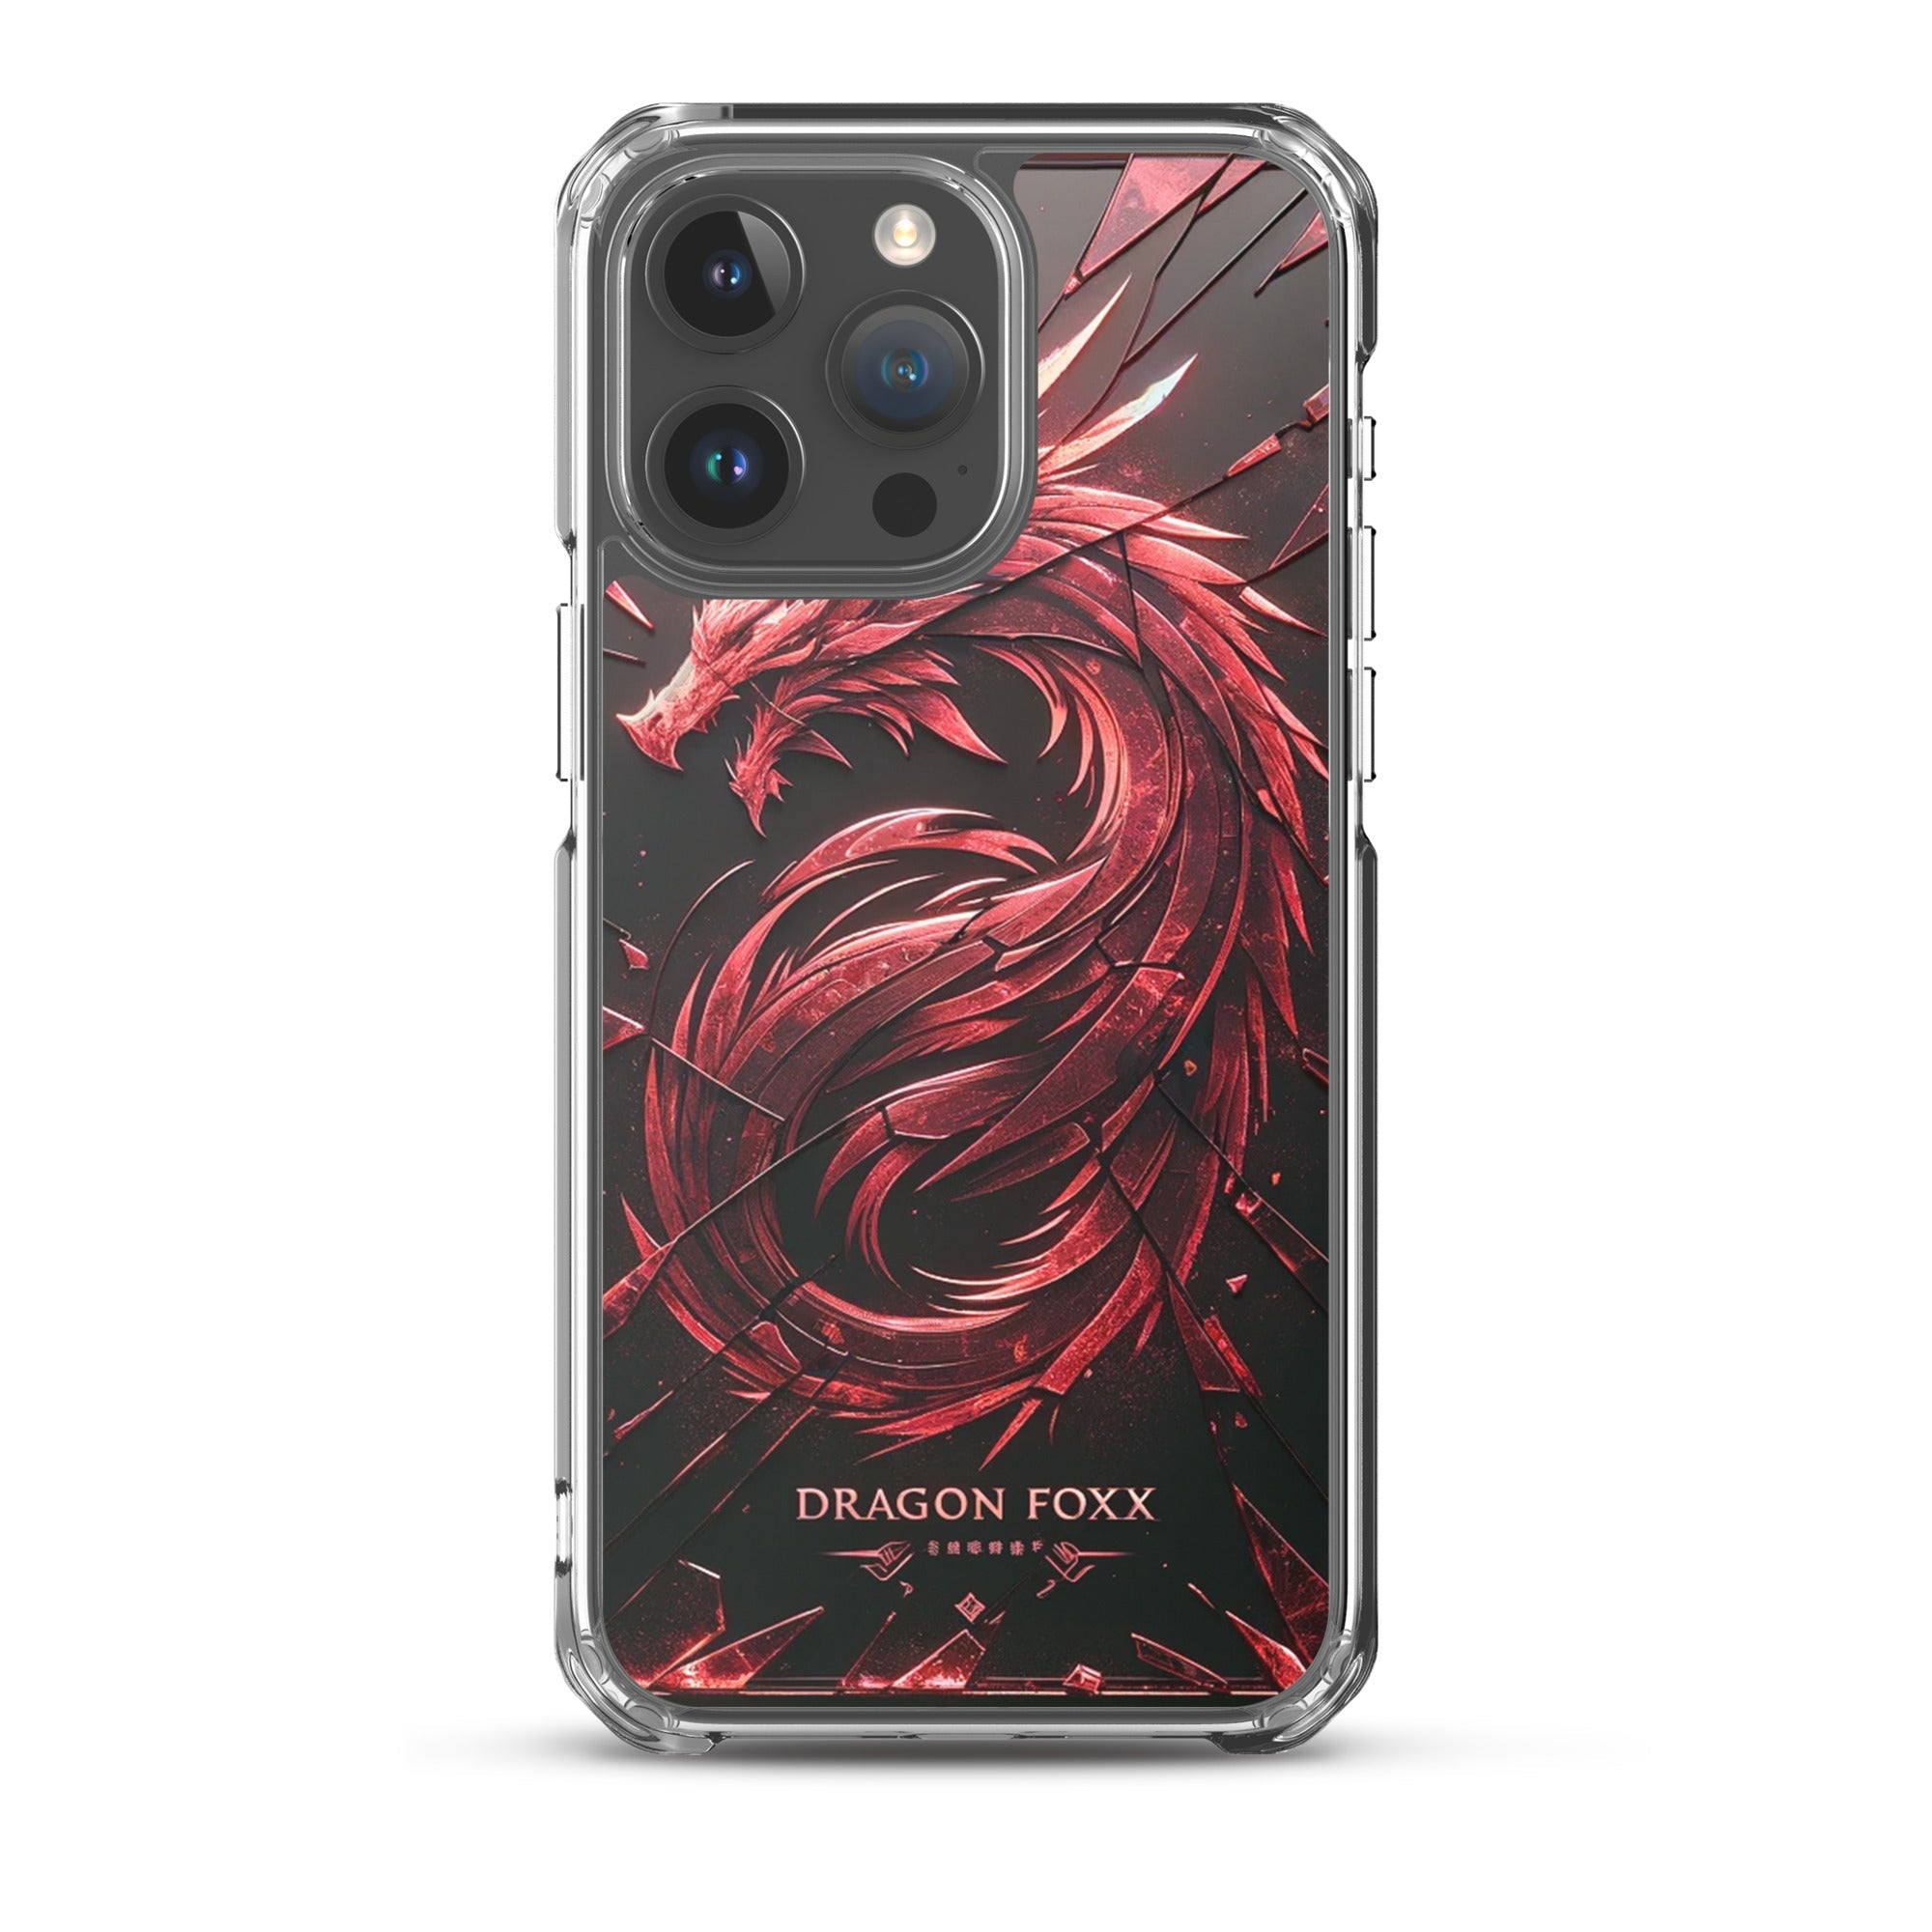 DRAGON FOXX™ Red Dragon Phone Case for iPhone® - Phone Case for iPhone® - DRAGON FOXX™ - DRAGON FOXX™ Red Dragon Phone Case for iPhone® - 7805351_17619 - iPhone 15 Pro Max - Red/Black/Clear - Accessories - Dragon Foxx™ - DRAGON FOXX™ Phone Case for iPhone®